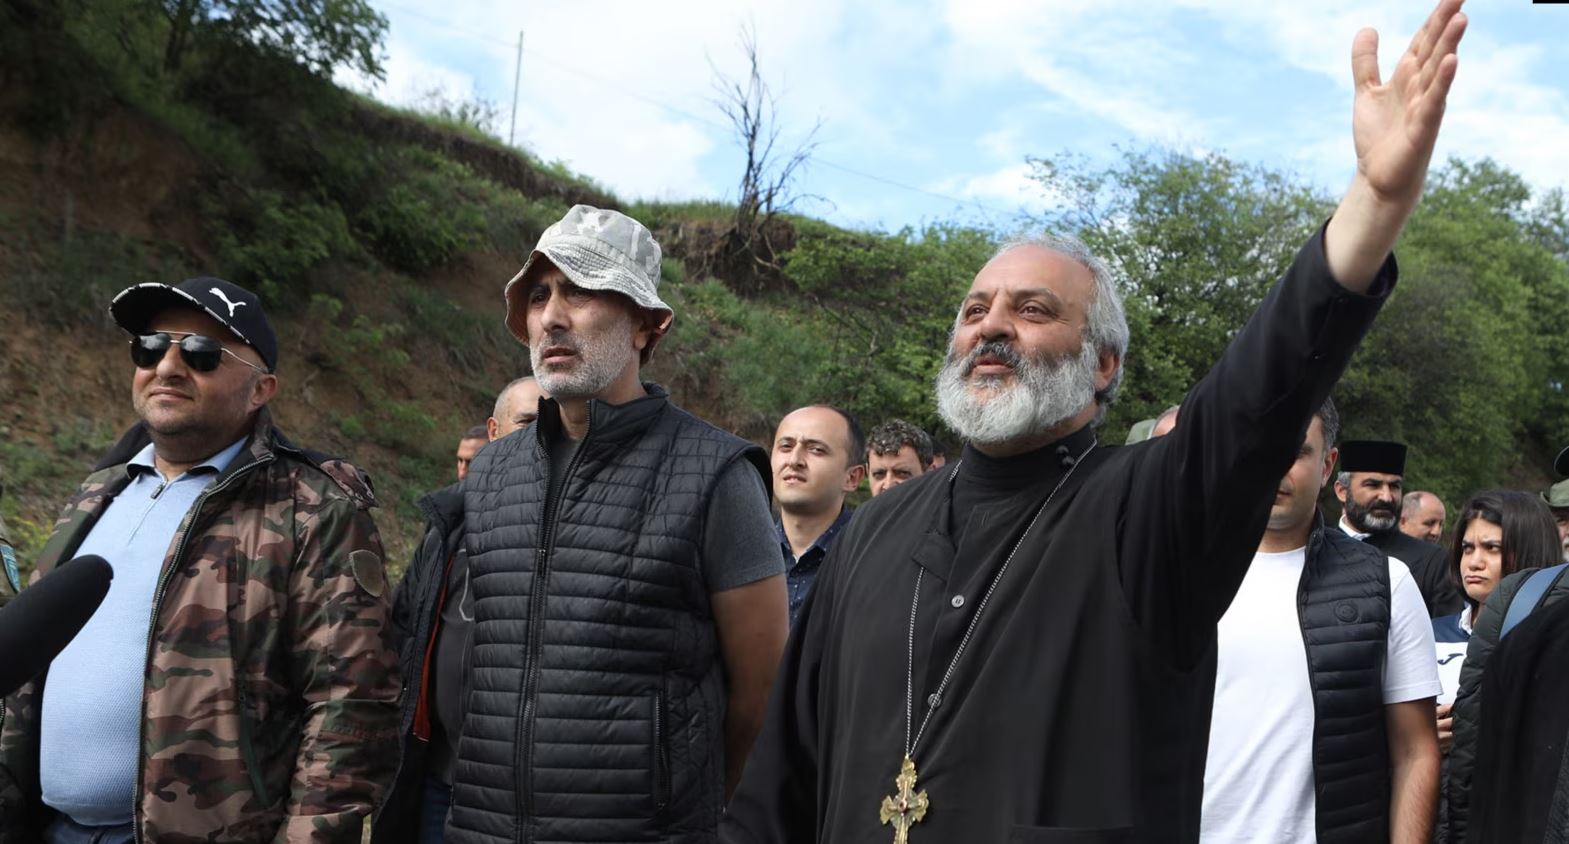 Protesters Led by Archbishop of Tavush March To Yerevan